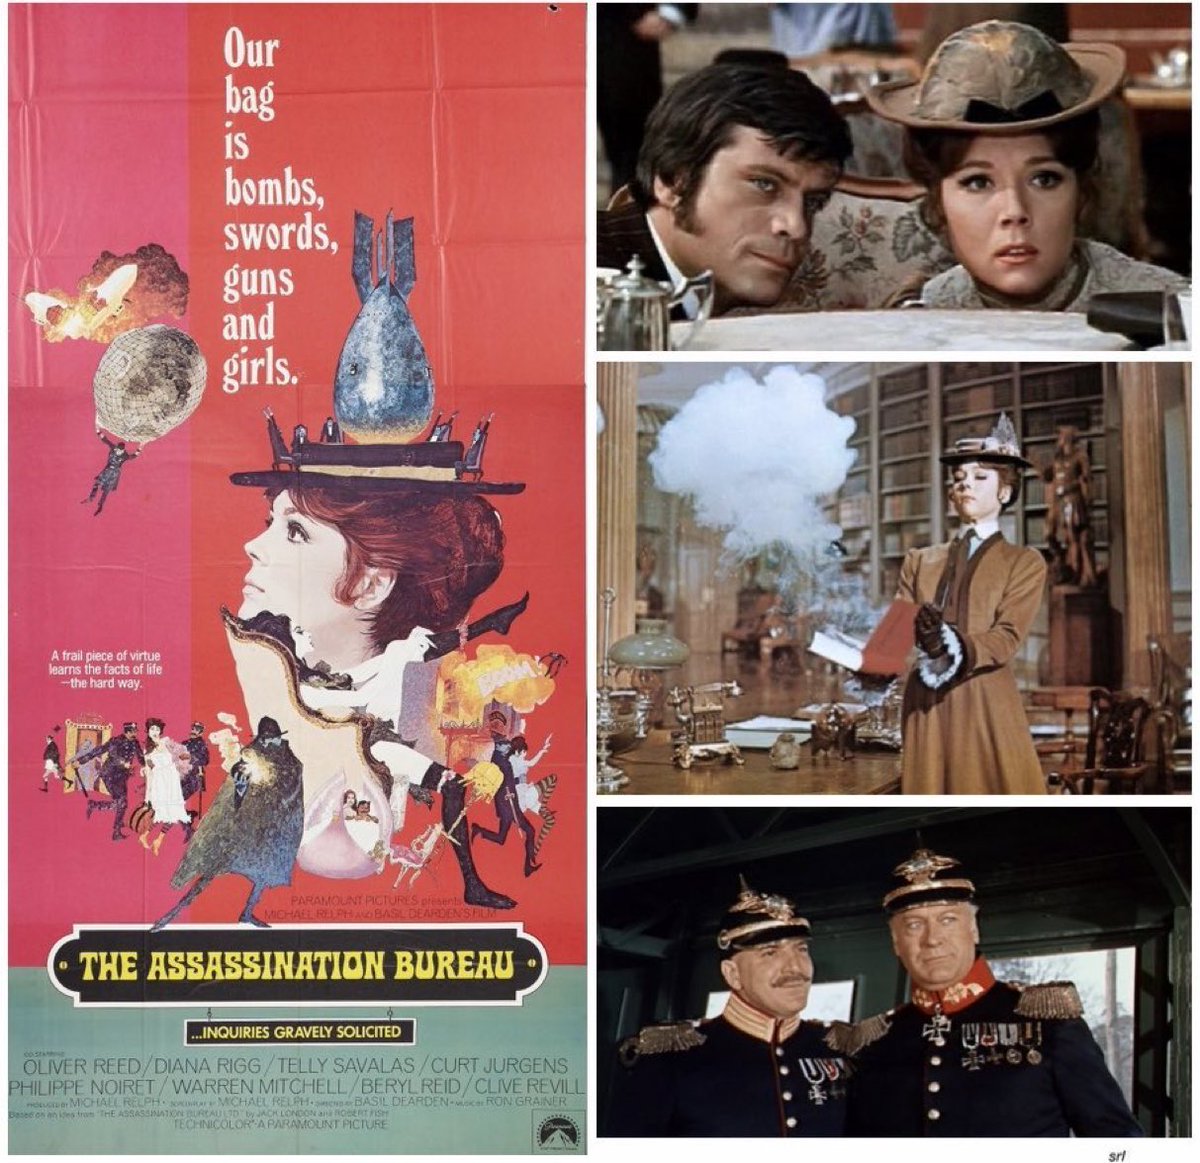 2:50pm TODAY on @TalkingPicsTV 👌One to Watch👌 

The 1969 #BlackComedy #Adventure film🎥”The Assassination Bureau” directed by #BasilDearden from a screenplay by Michael Relph (add’l dialogue #WolfMankowitz)

🌟#OliverReed #DianaRigg #TellySavalas #CurdJürgens #BerylReid

1 of 2